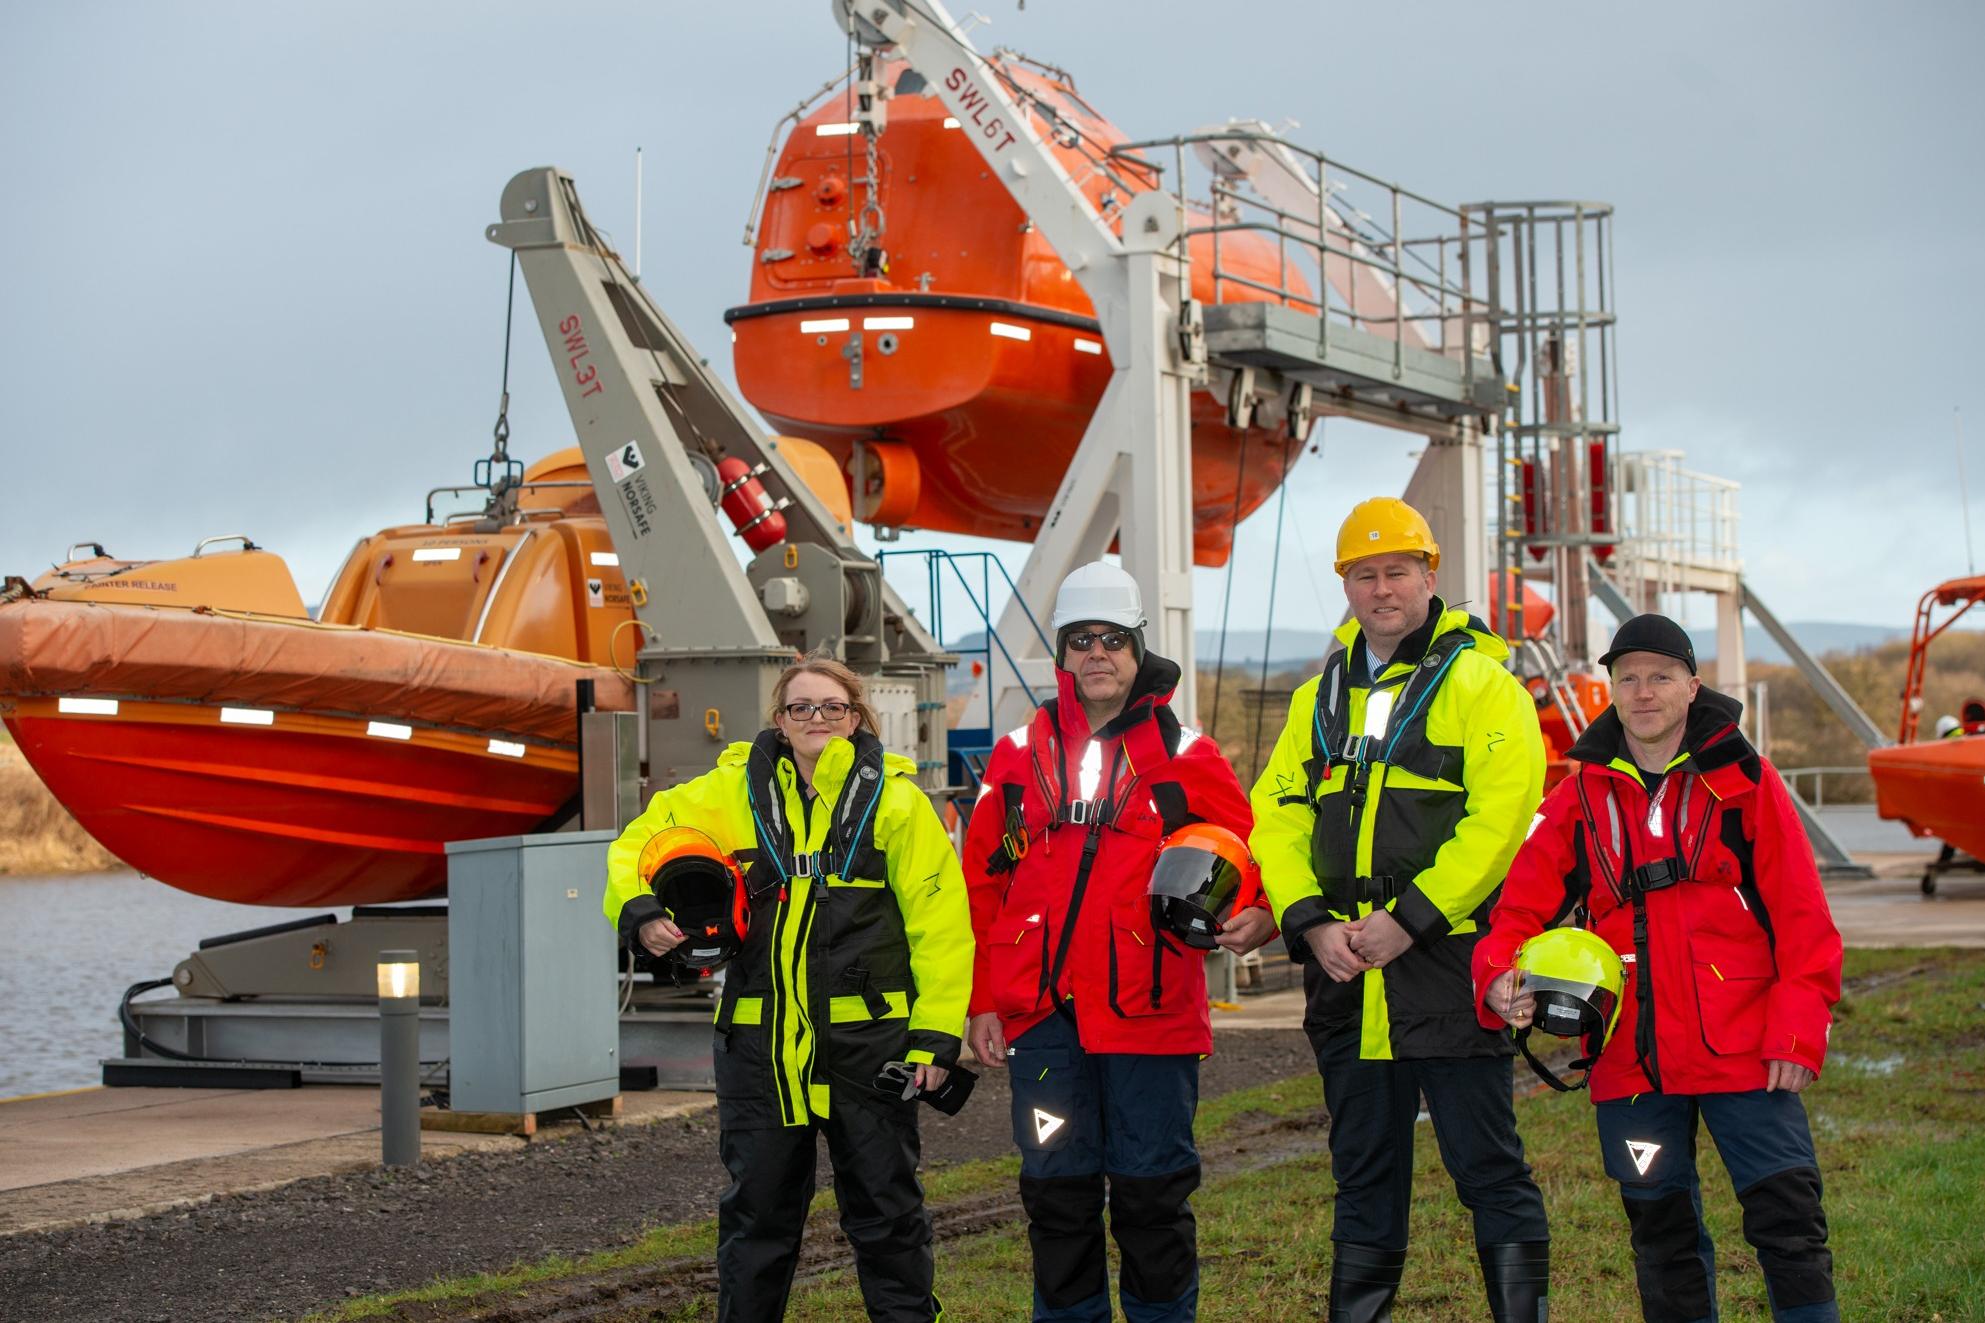 offshore safety specialist launches new training centre close to clyde creating several jobs